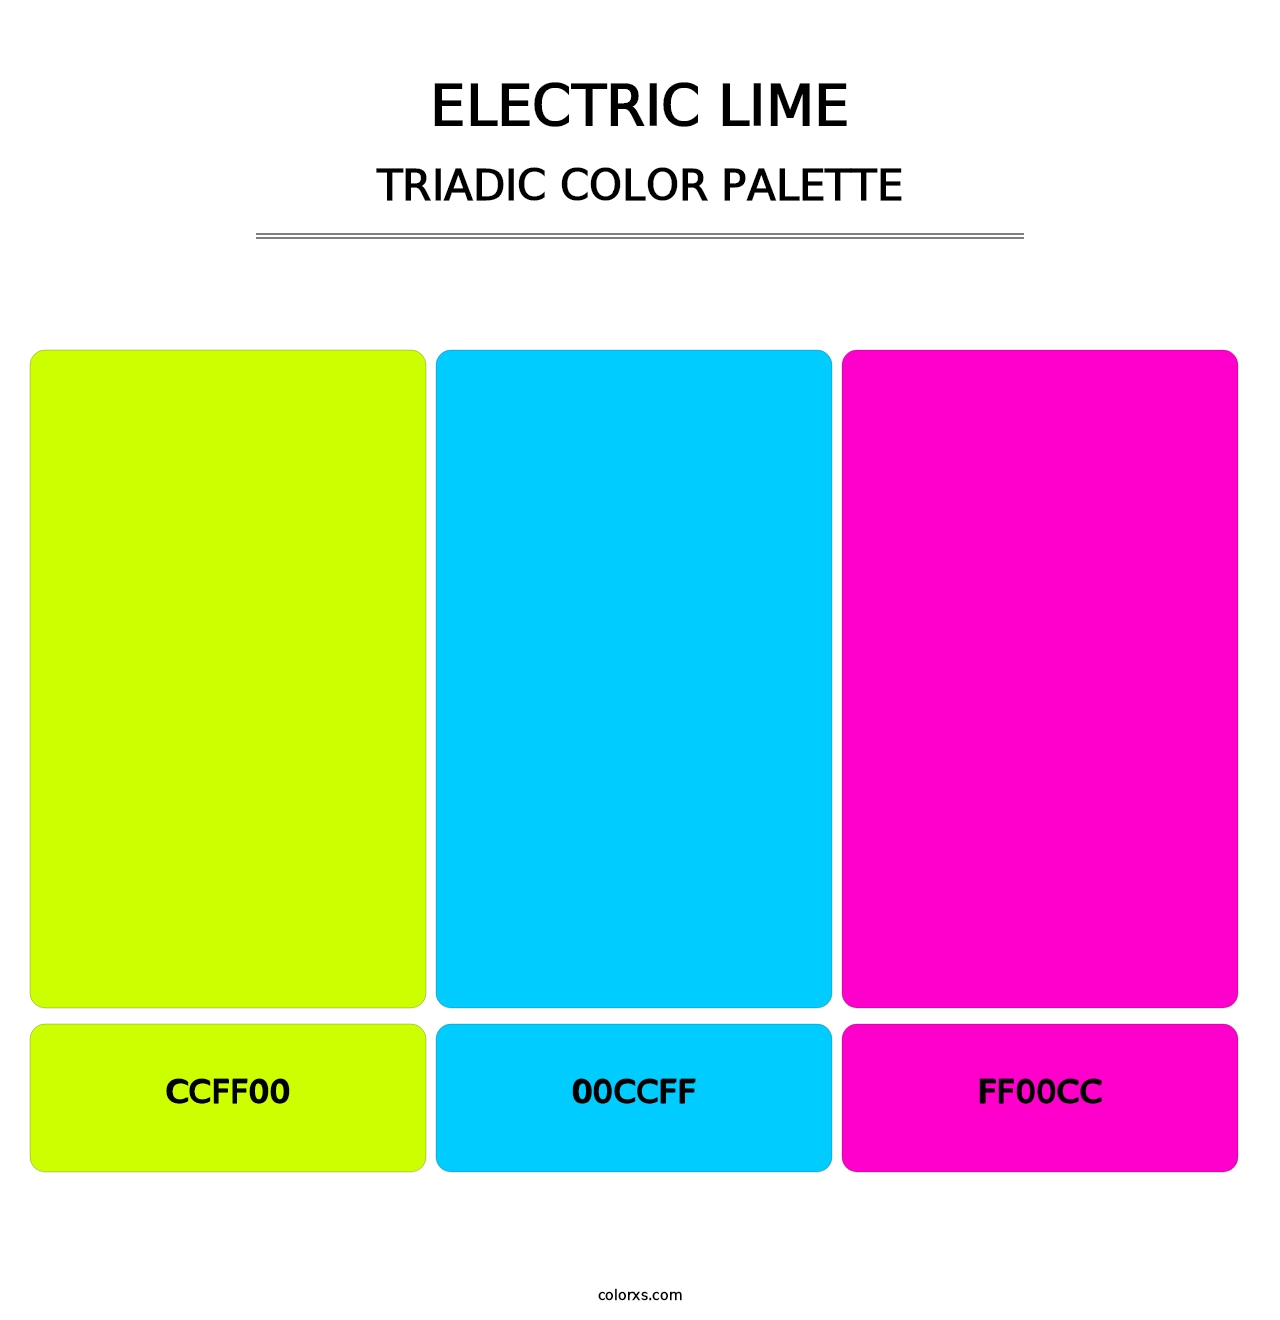 Electric Lime - Triadic Color Palette